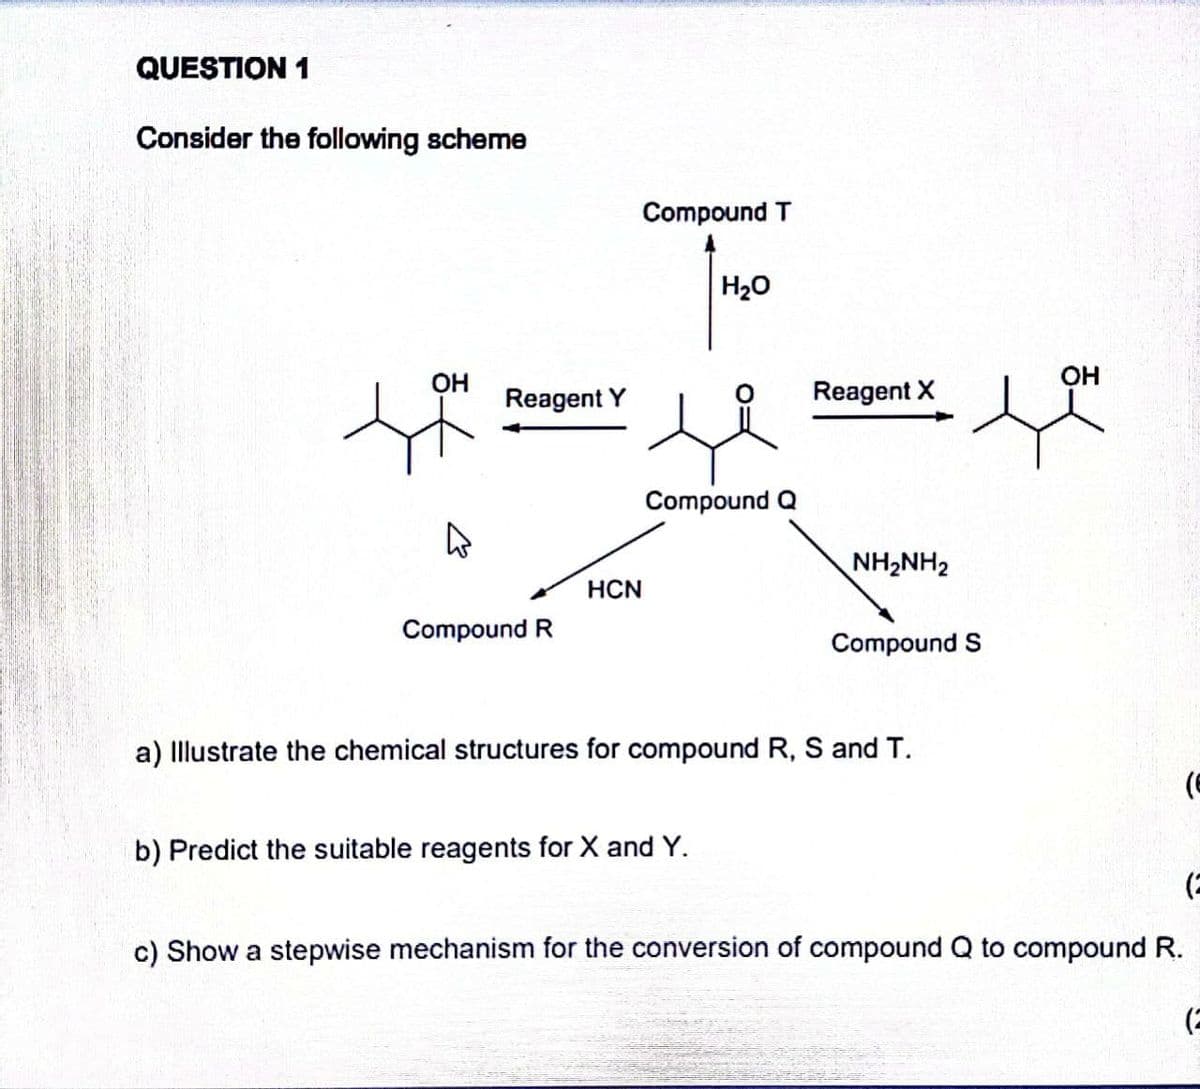 QUESTION 1
Consider the following scheme
Compound T
H20
OH
OH
Reagent Y
Reagent X
Compound Q
NH2NH2
HCN
Compound R
Compound S
a) Illustrate the chemical structures for compound R, S and T.
b) Predict the suitable reagents for X and Y.
c) Show a stepwise mechanism for the conversion of compound Q to compound R.
(2
